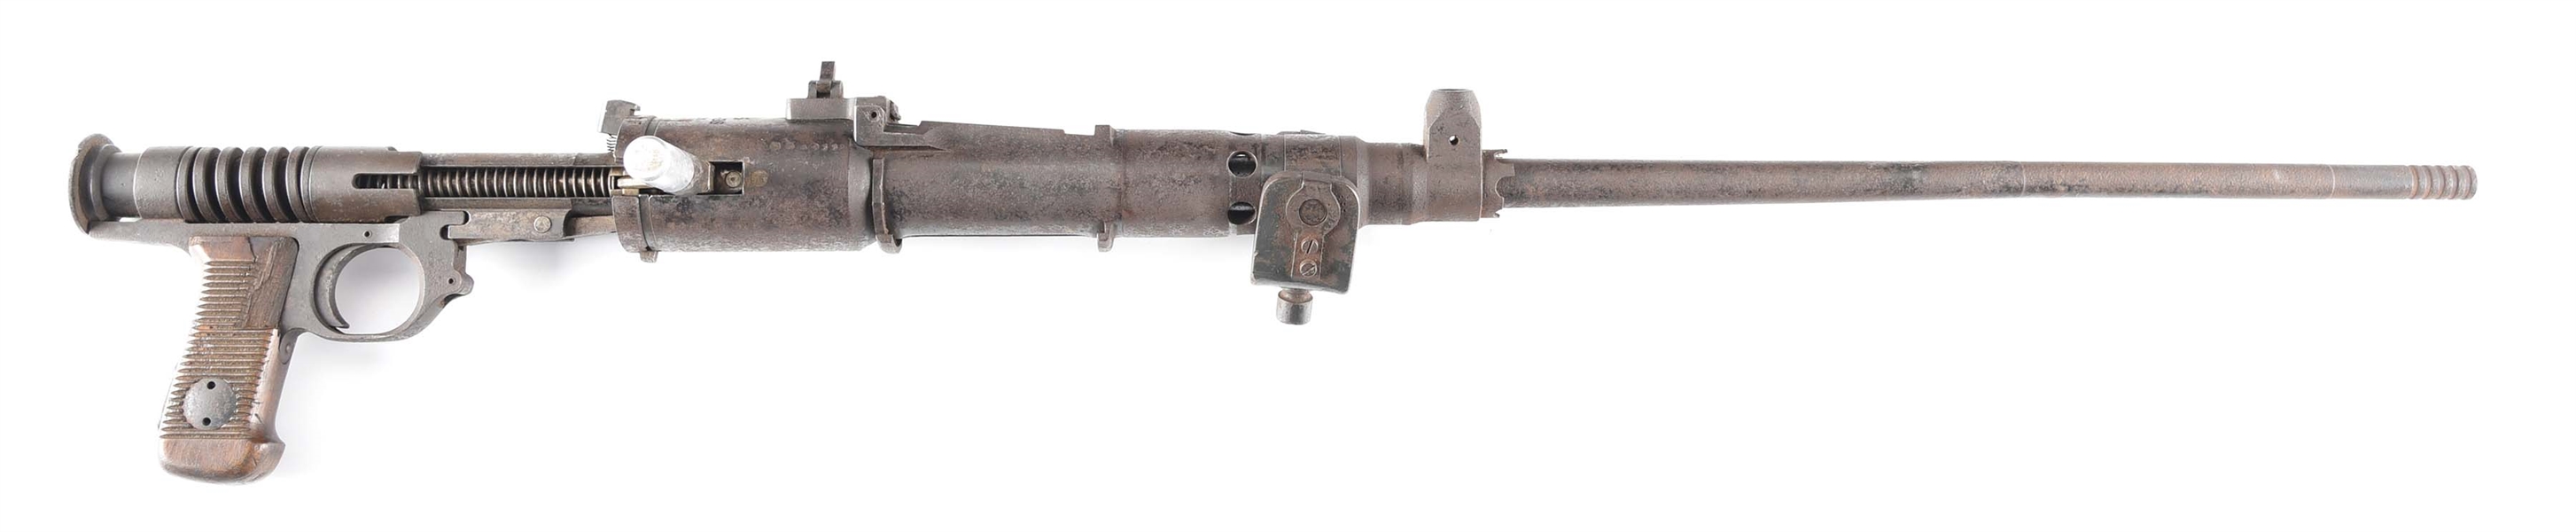 (N) FRESH TO THE MARKET & WELL DOCUMENTED G.I. CAPTURED KRIEGHOFF MG-15 AIRCRAFT MACHINE GUN RECOVERED FROM A DOWNED GERMAN AIRCRAFT IN ICELAND (CURIO & RELIC).